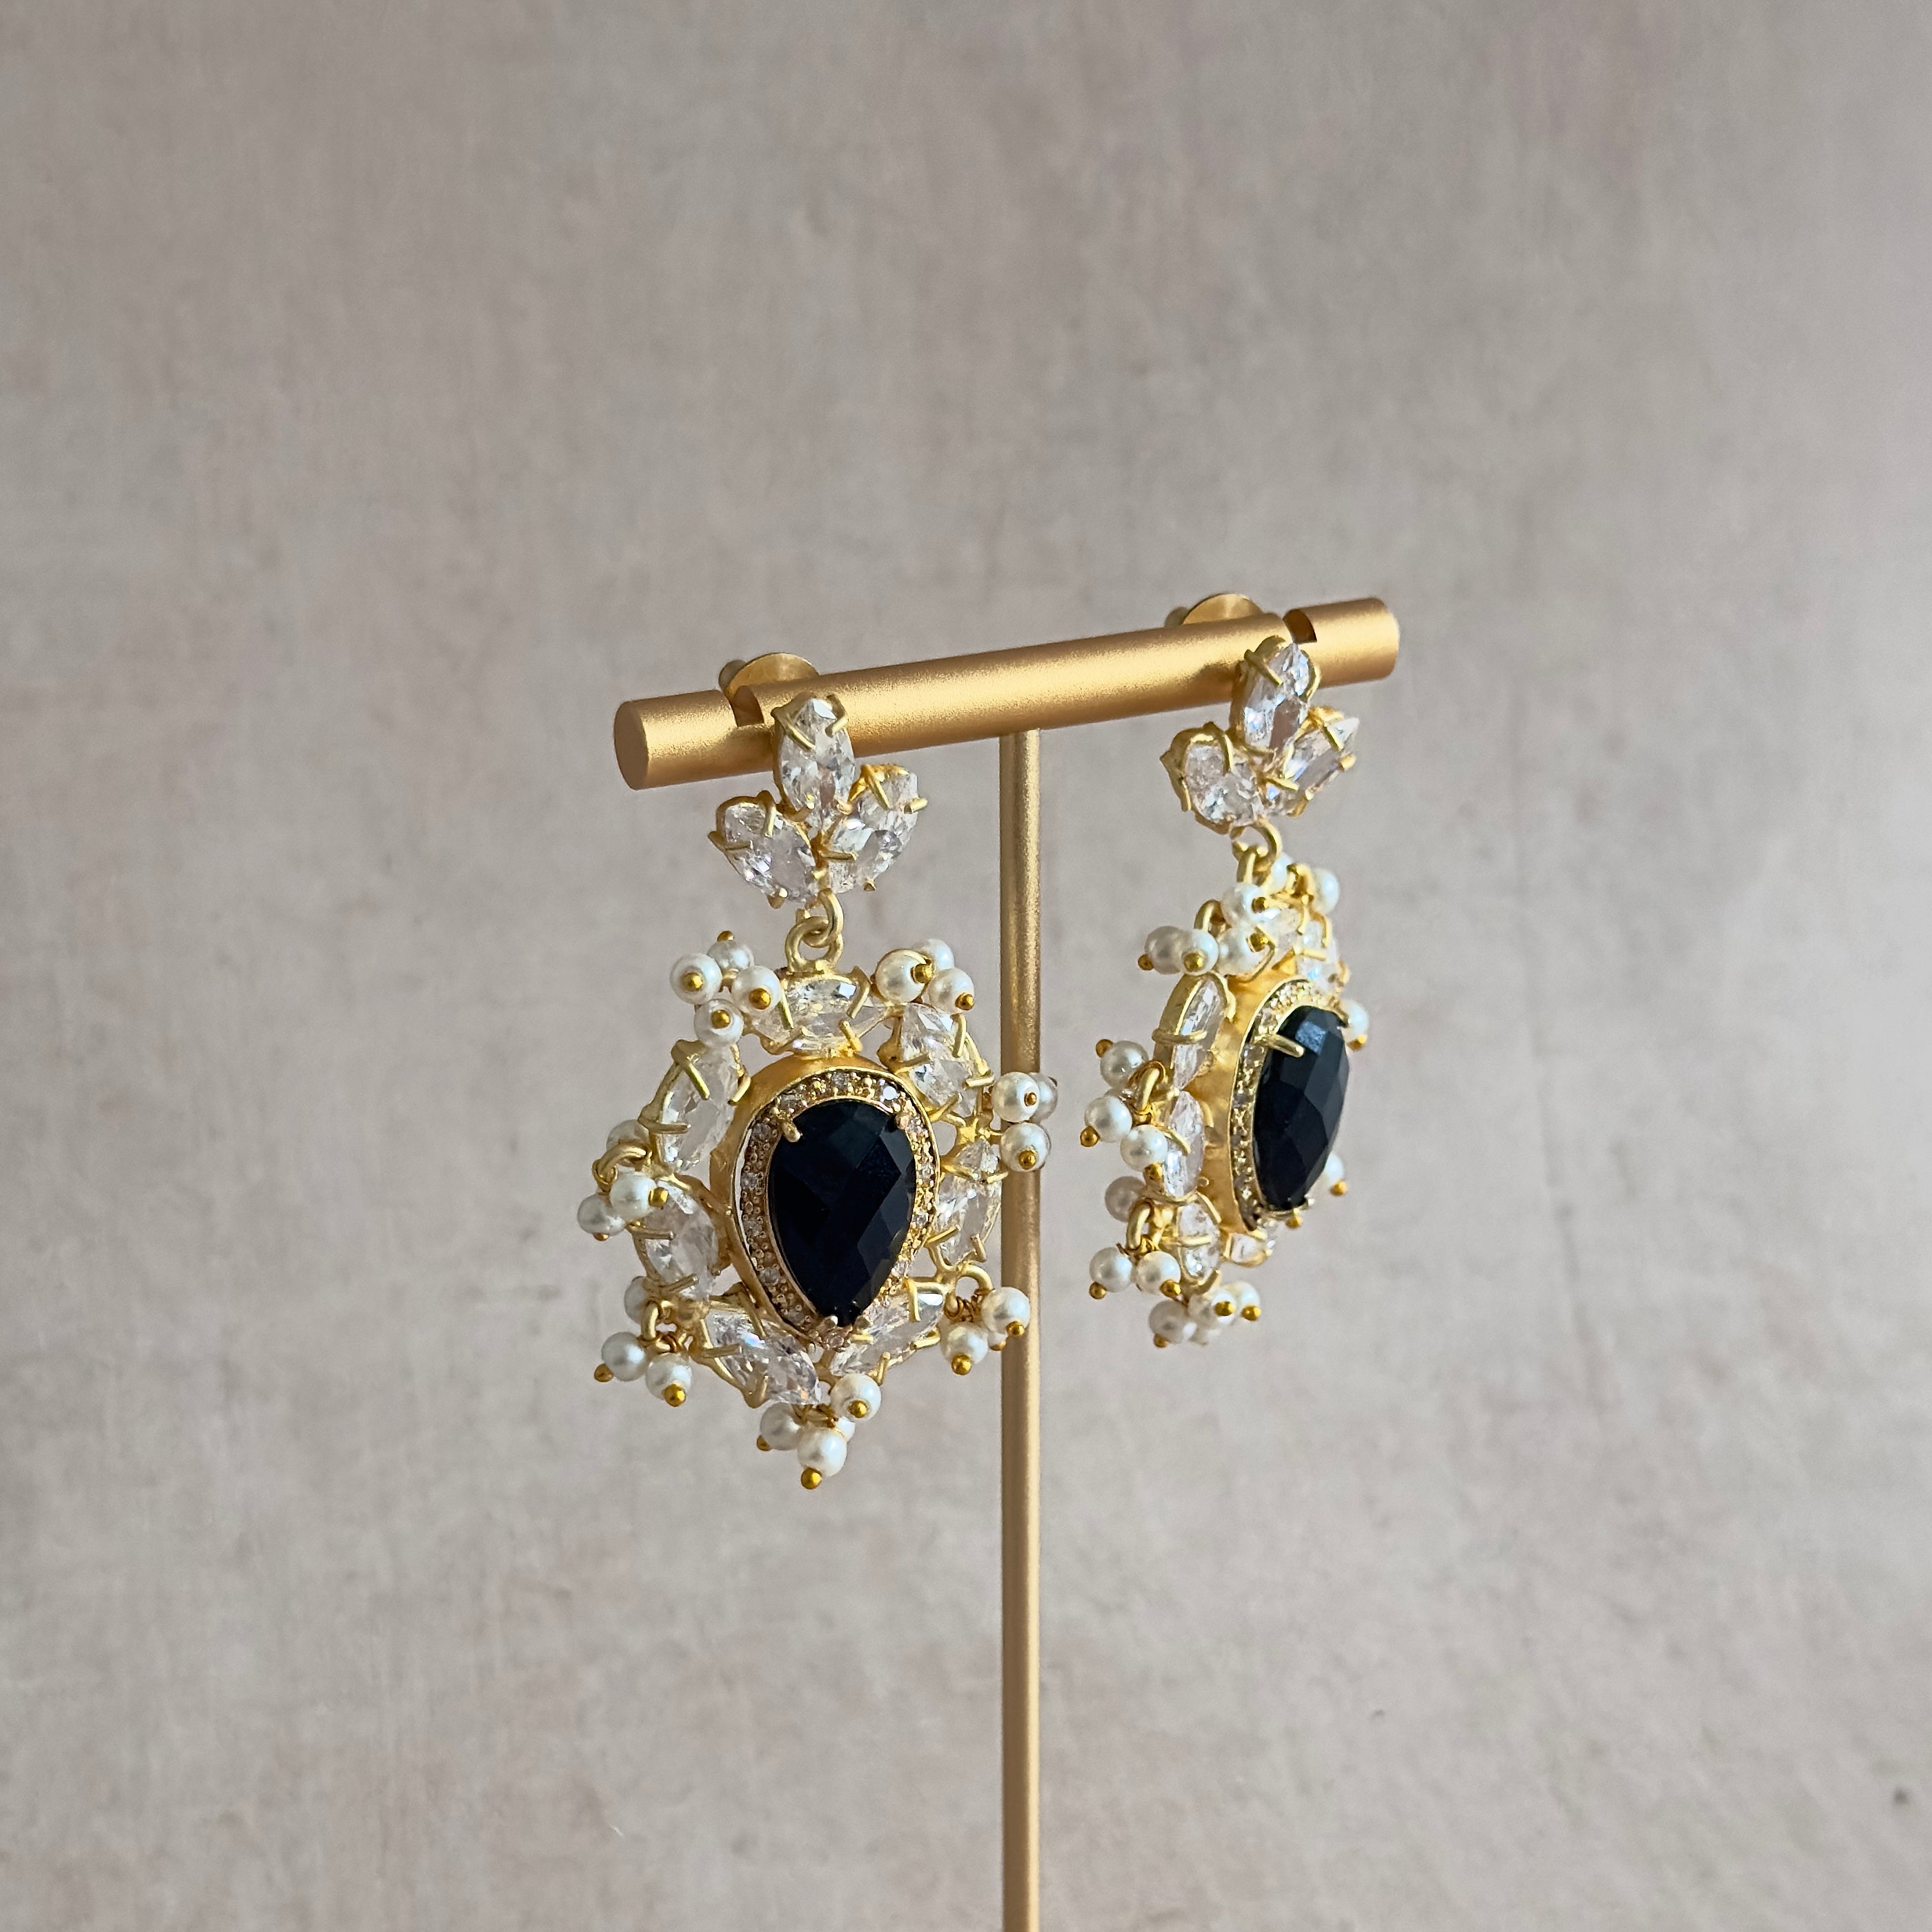 Elevate your style with our Tahira Black Crystal Drop Earrings. Crafted with stunning black onyx and sparkling cubic zirconia, these statement earrings add a touch of sophistication and glamour to any outfit. Fashion meets elegance with these must-have accessories.